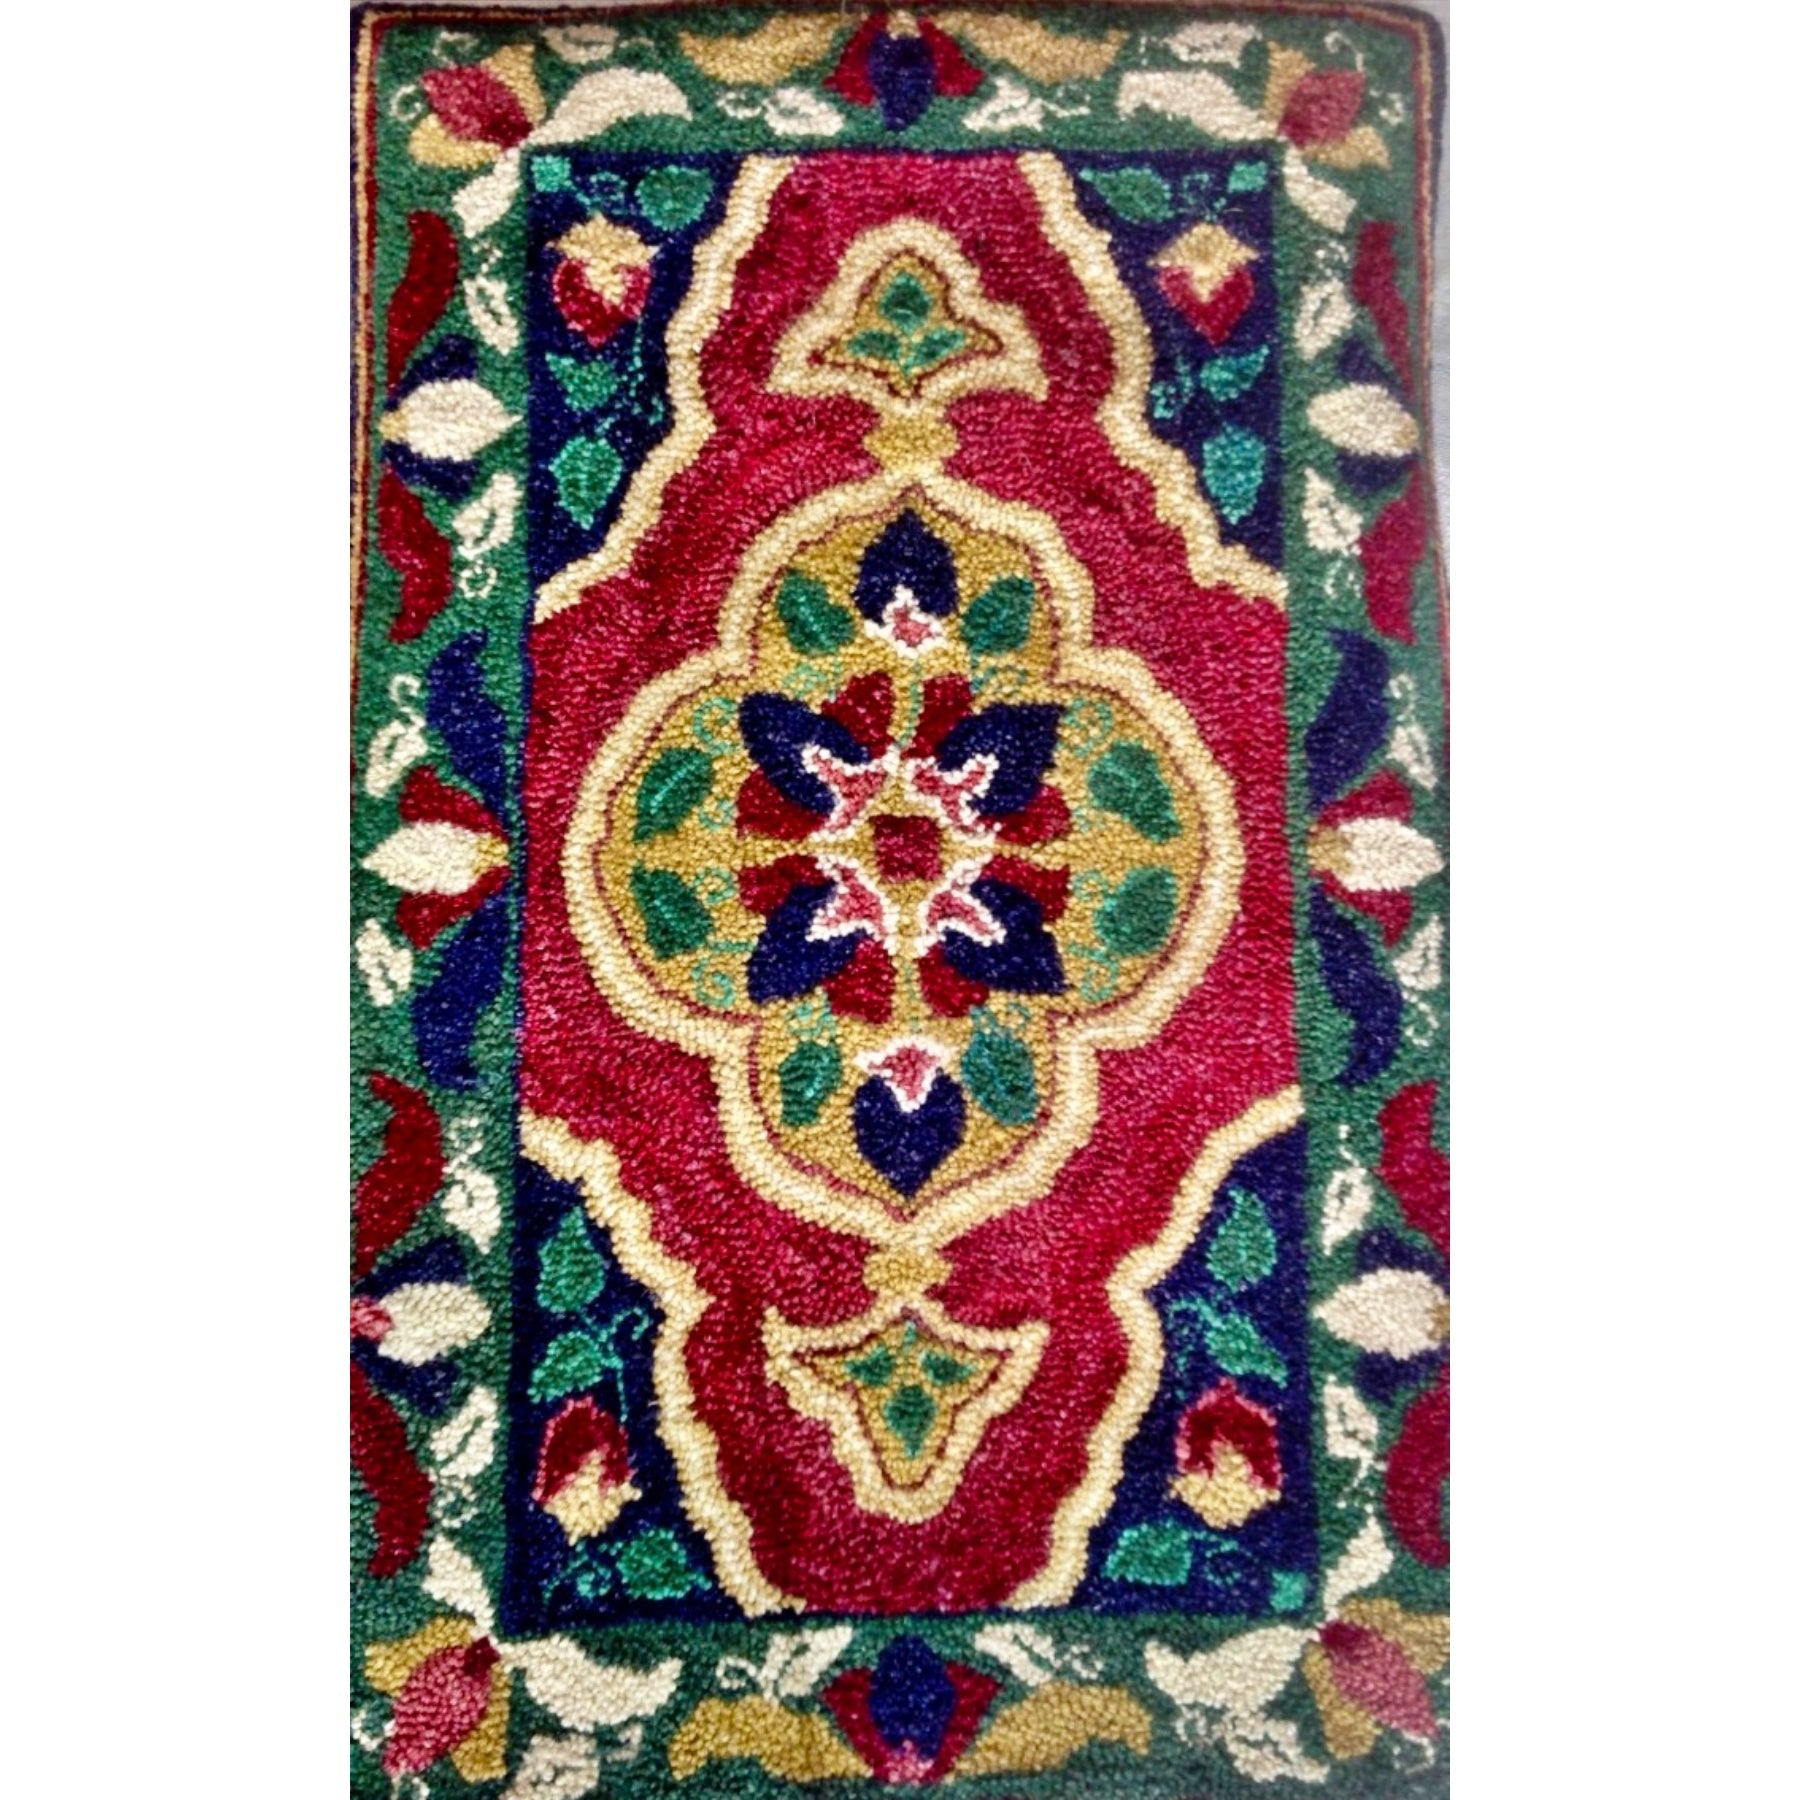 Early Persia, rug hooked by Kathy Donovan